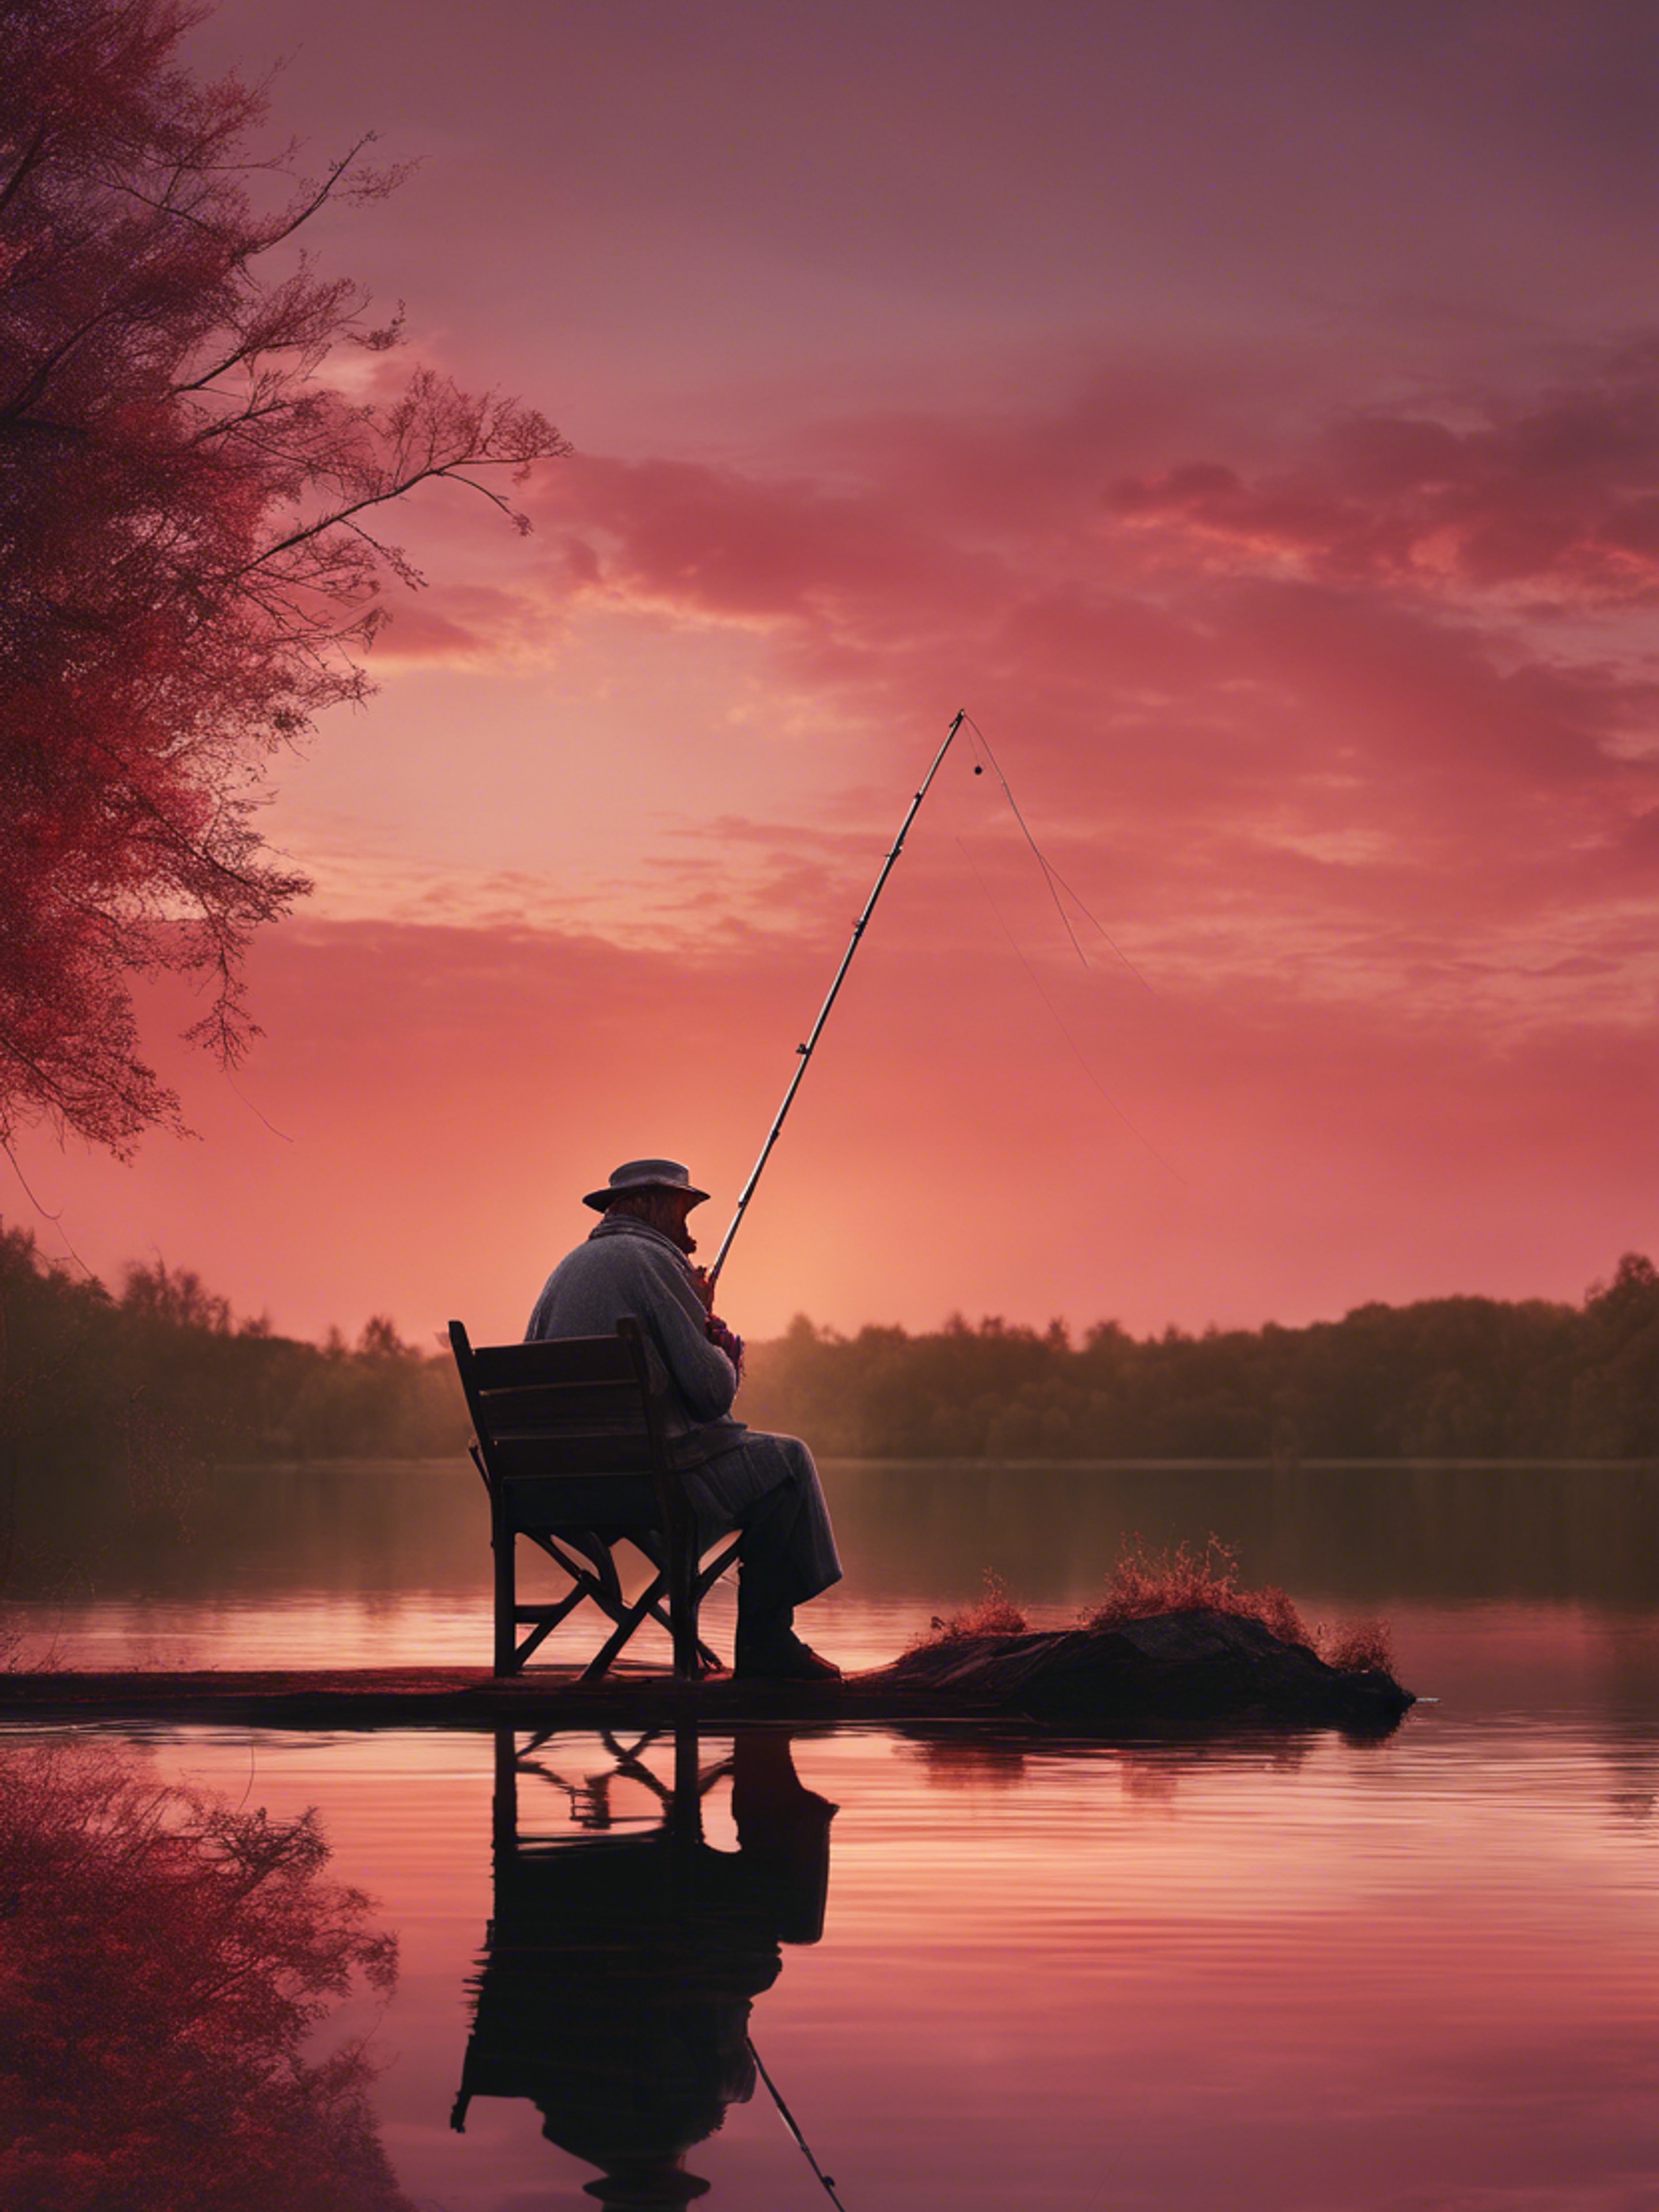 An old man maintaining a lonely vigil beside a lake under a ruby-red sunset, a fishing rod in his hand. Tapeta[4b1db37a85dd45b294cb]